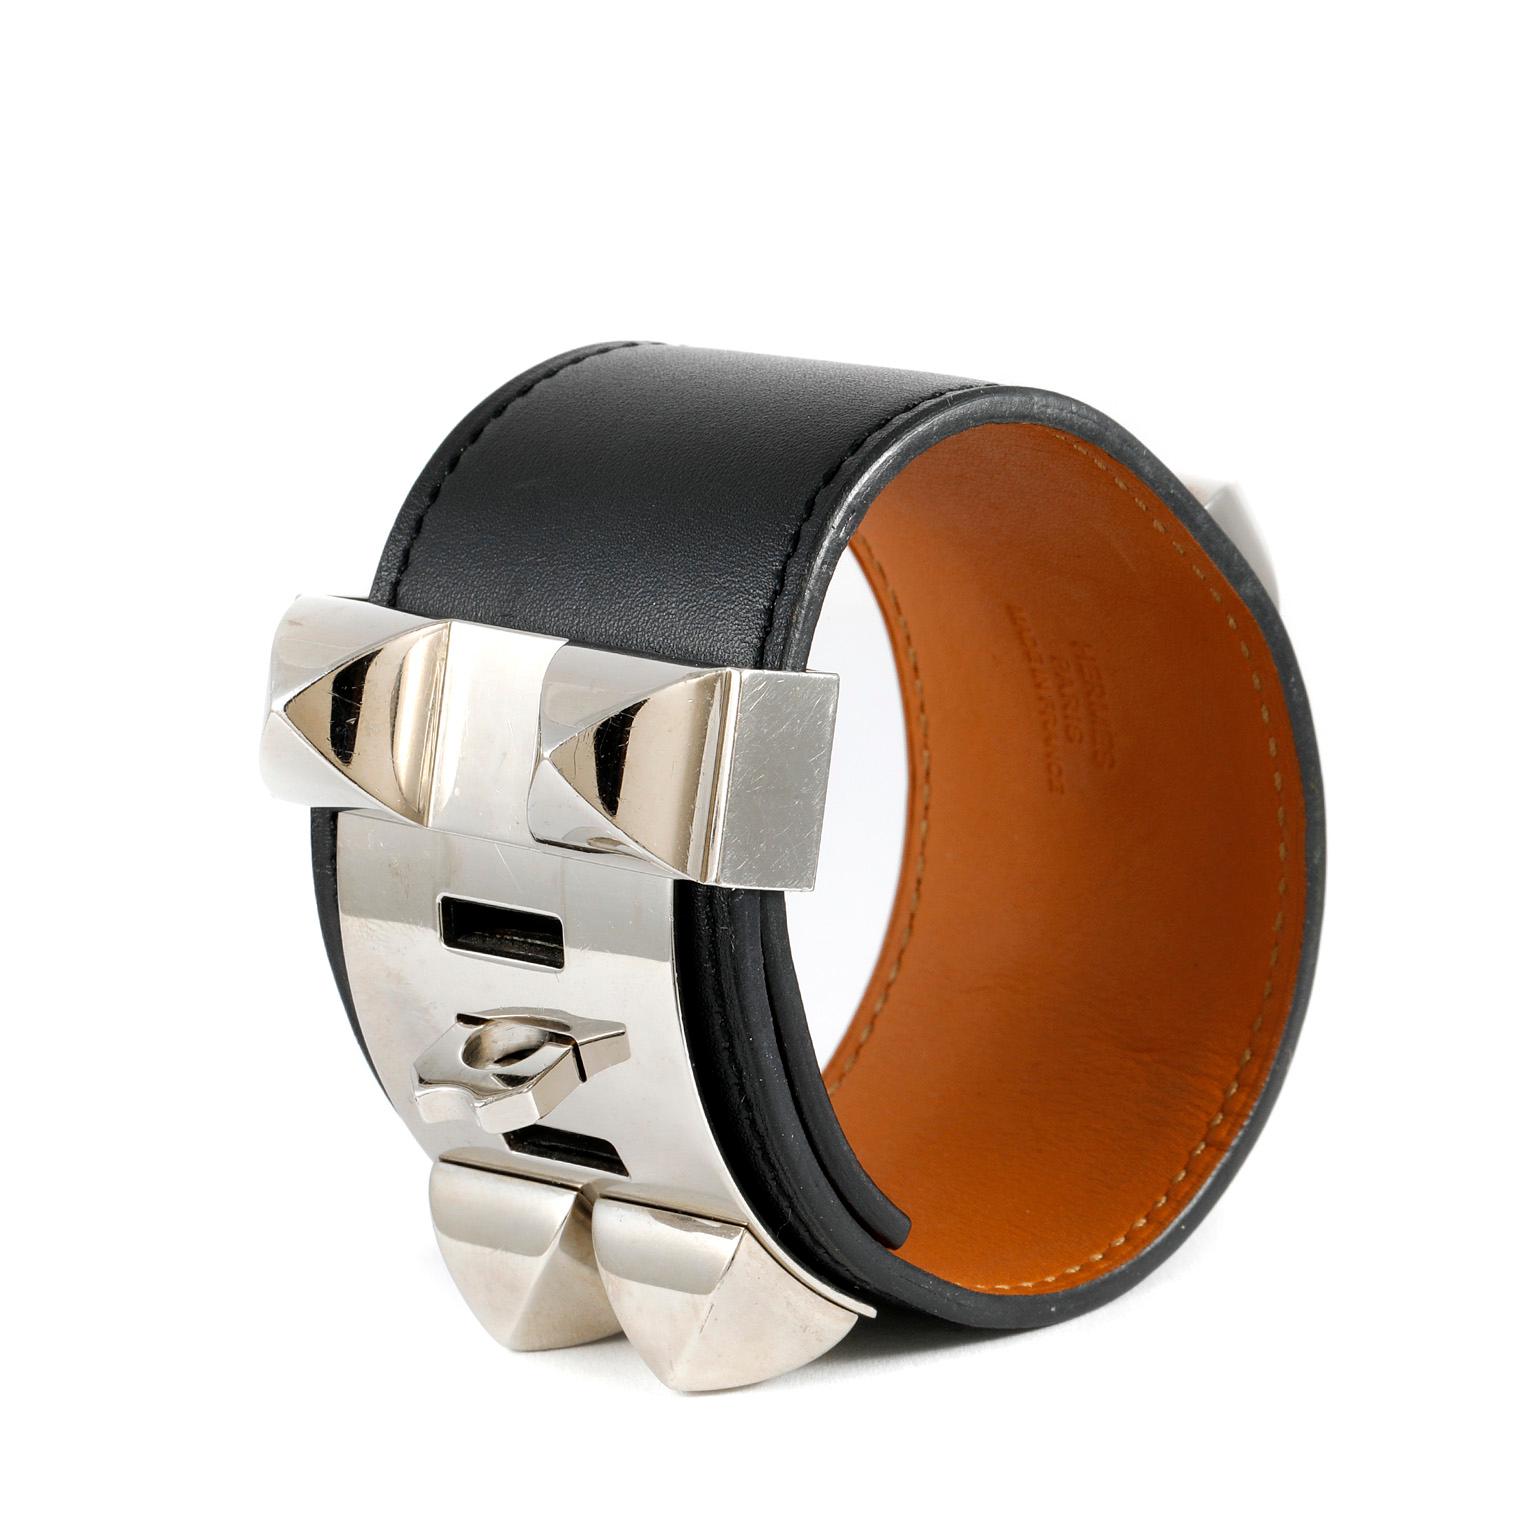 This authentic Hermès Black Leather Collier de Chien Bracelet Cuff is in pristine condition.  The iconic Hermès CDC adds a chic bit of edginess to any ensemble.  Black Swift leather with Palladium Medor pyramid style studs and ring.  Adjustable